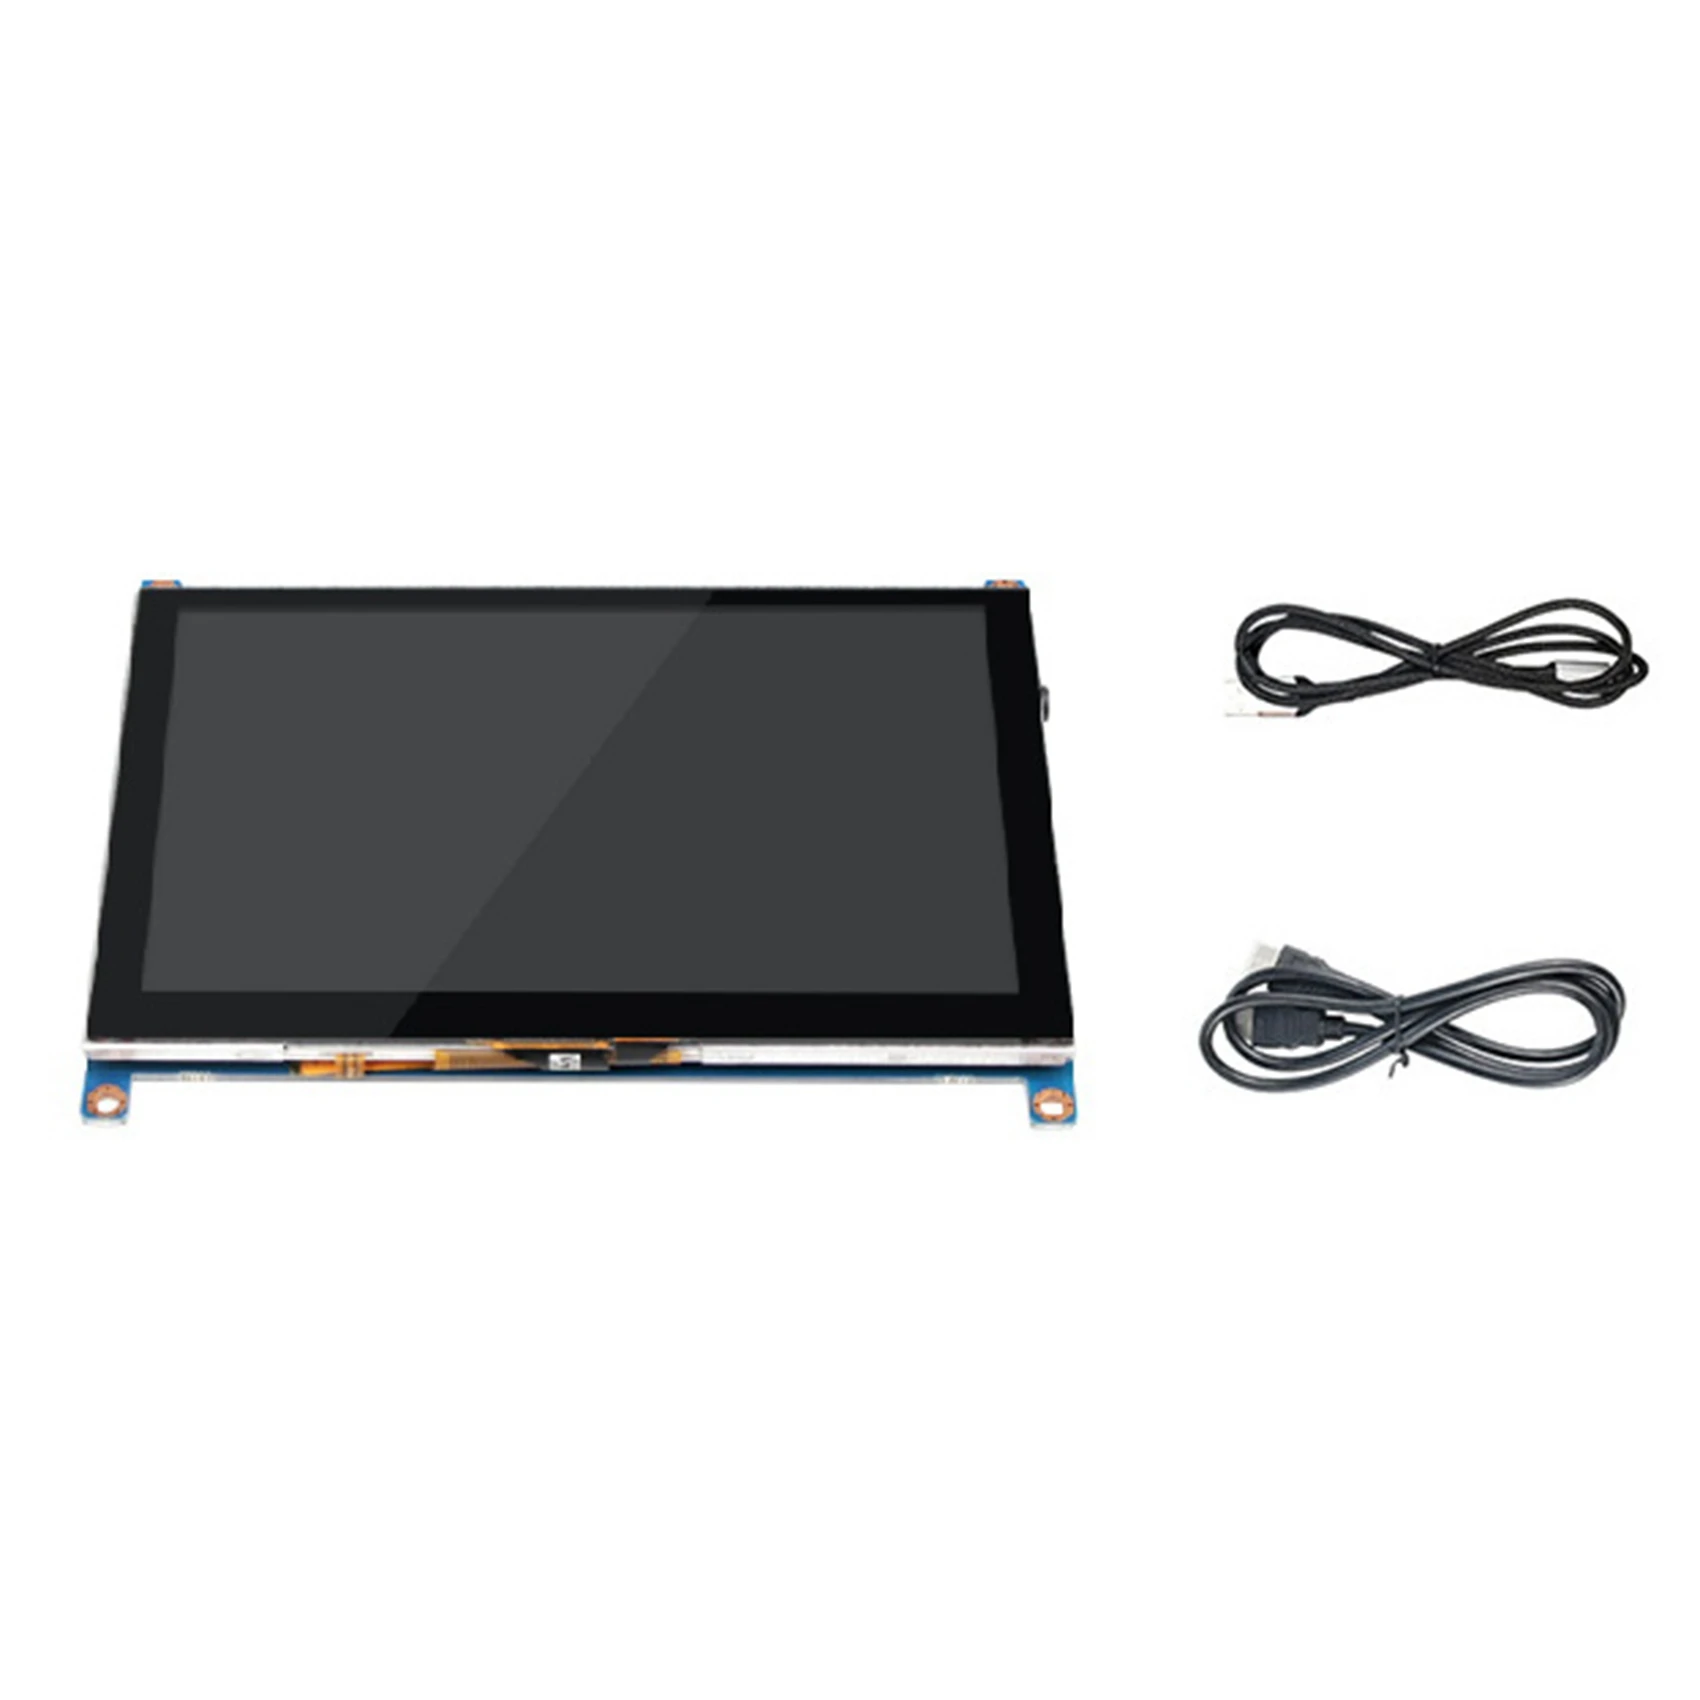 

5 Inch Touch Screen Monitor Pane 800X480 Capacitive Touch Display HDMI-Compatible VGA Display Compatible Raspberry Pi